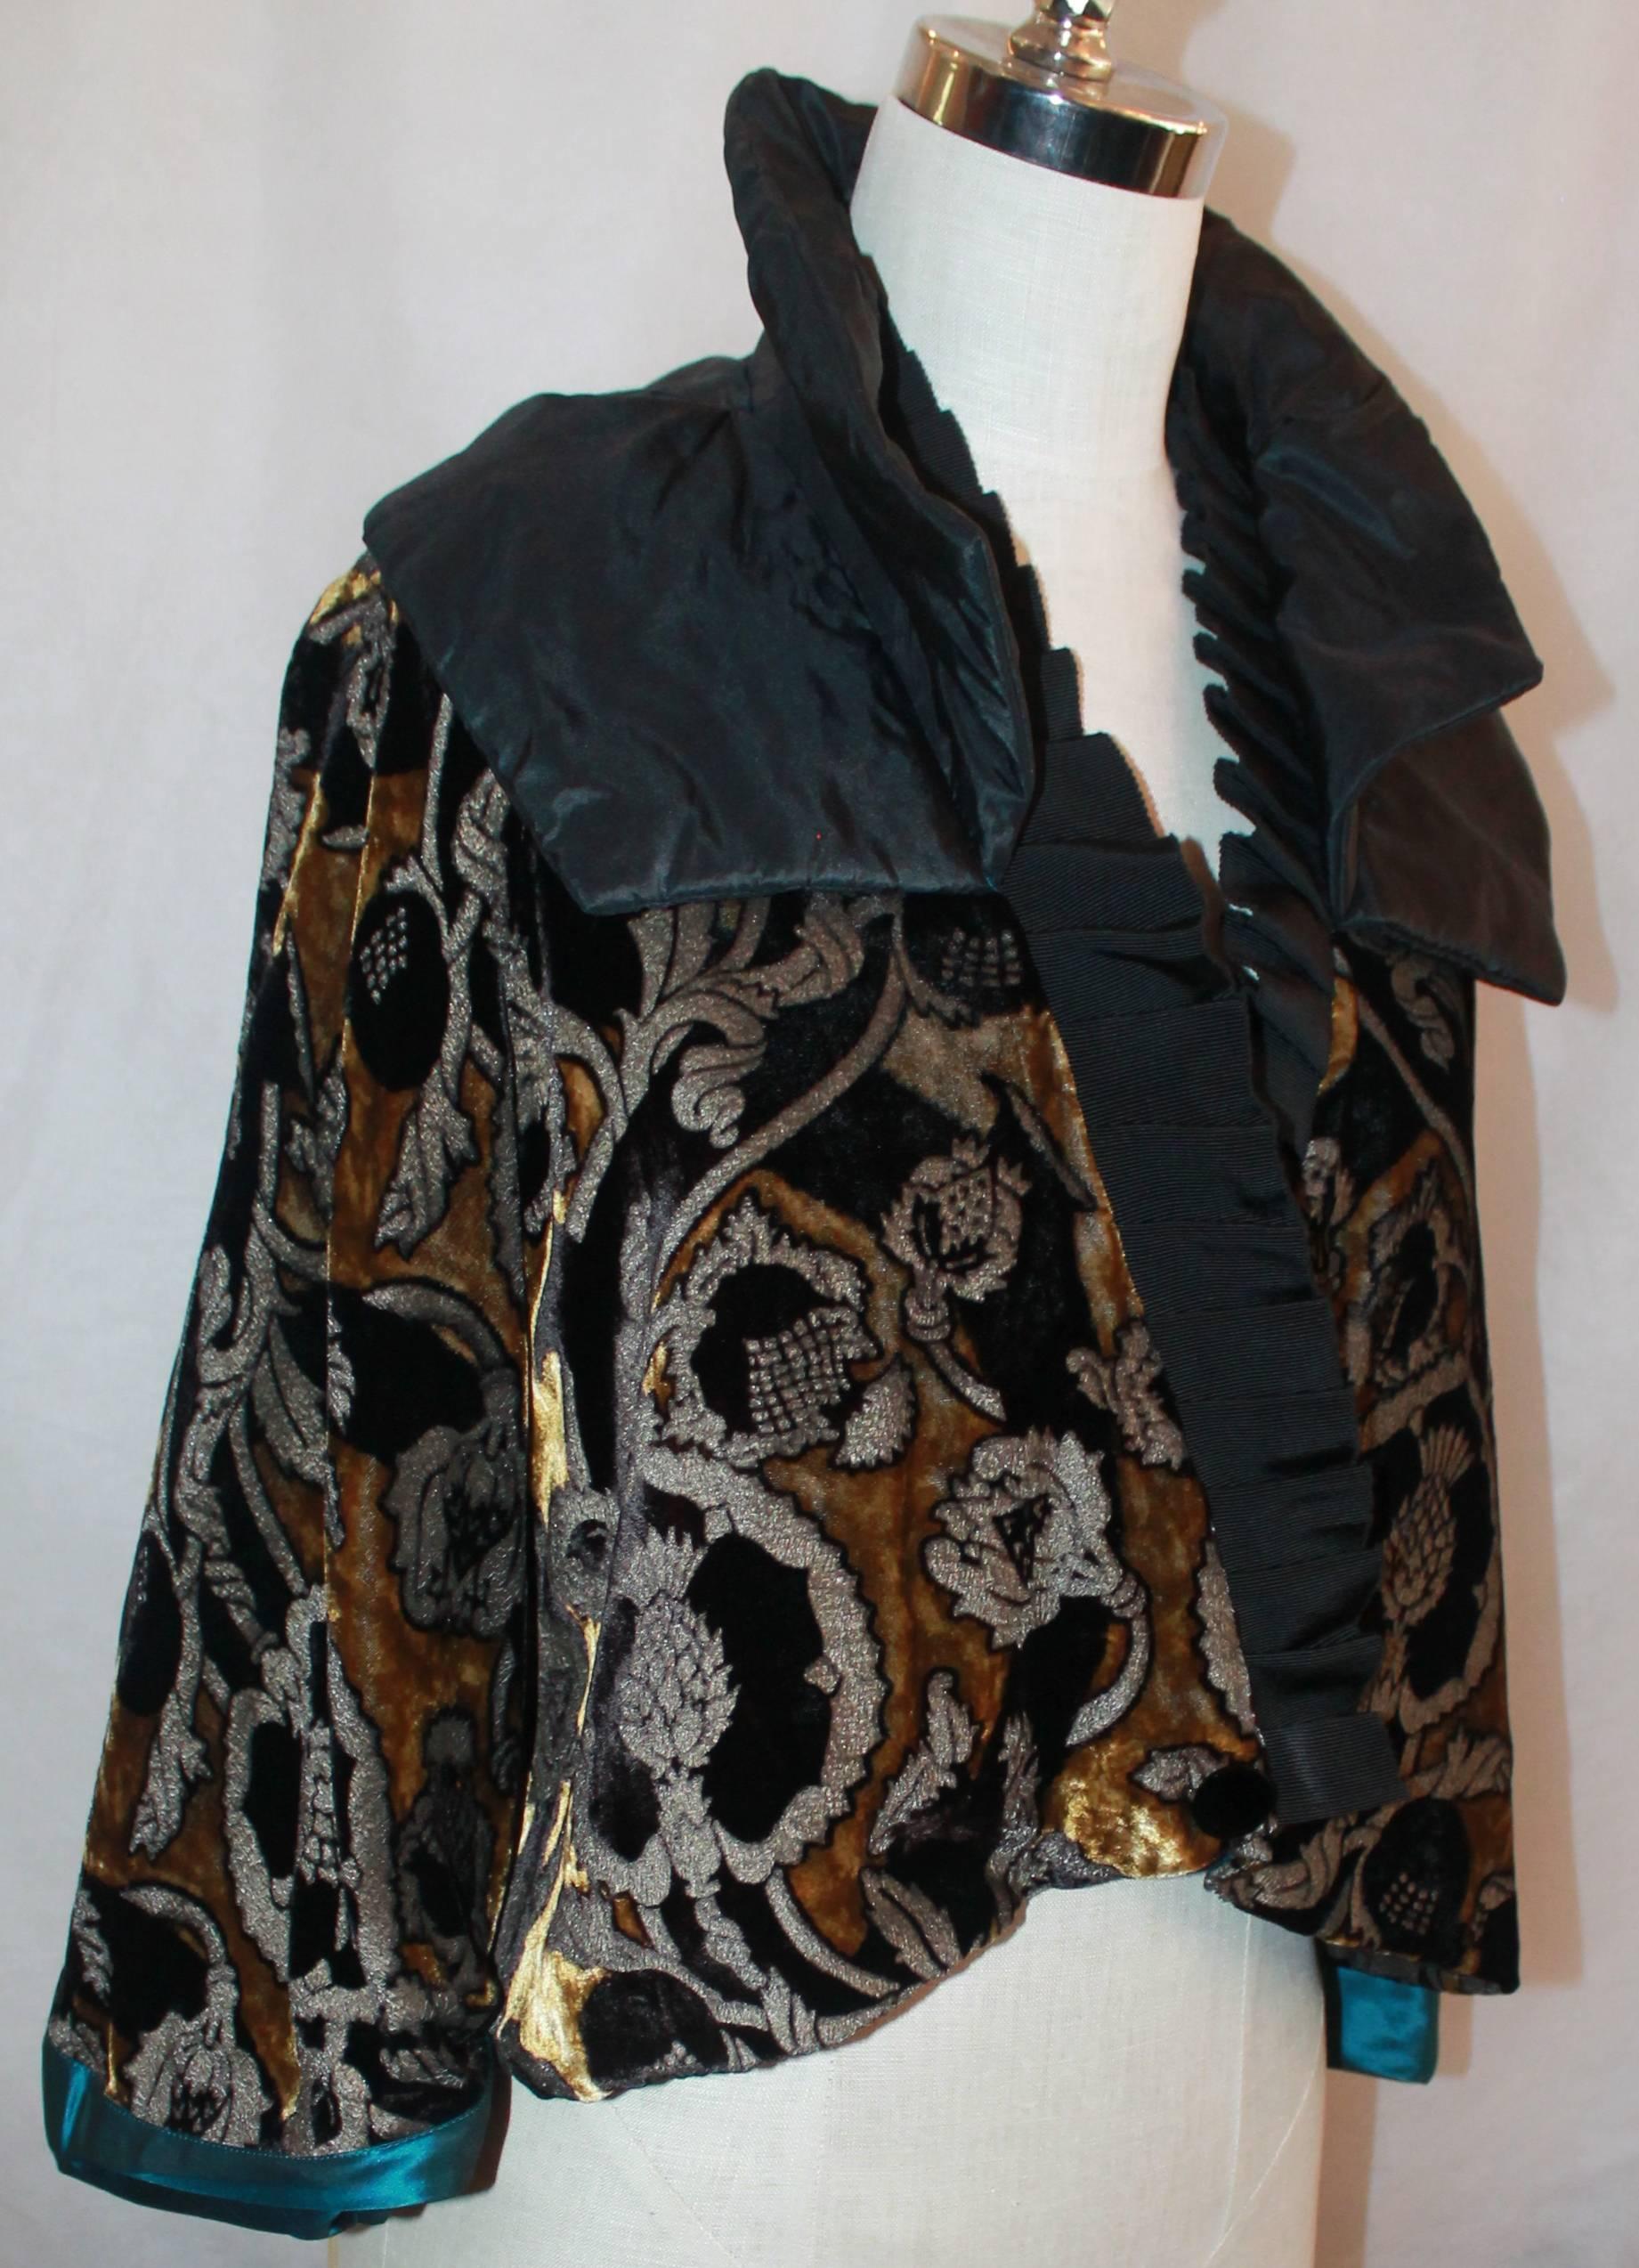 Etro Bolero with Taffeta Collar - M

This Bolero is in excellent condition and has a cut velvet look with black grograin trim and a black taffeta teal collar. There is a matching teal dress available in store. Purchase separately.